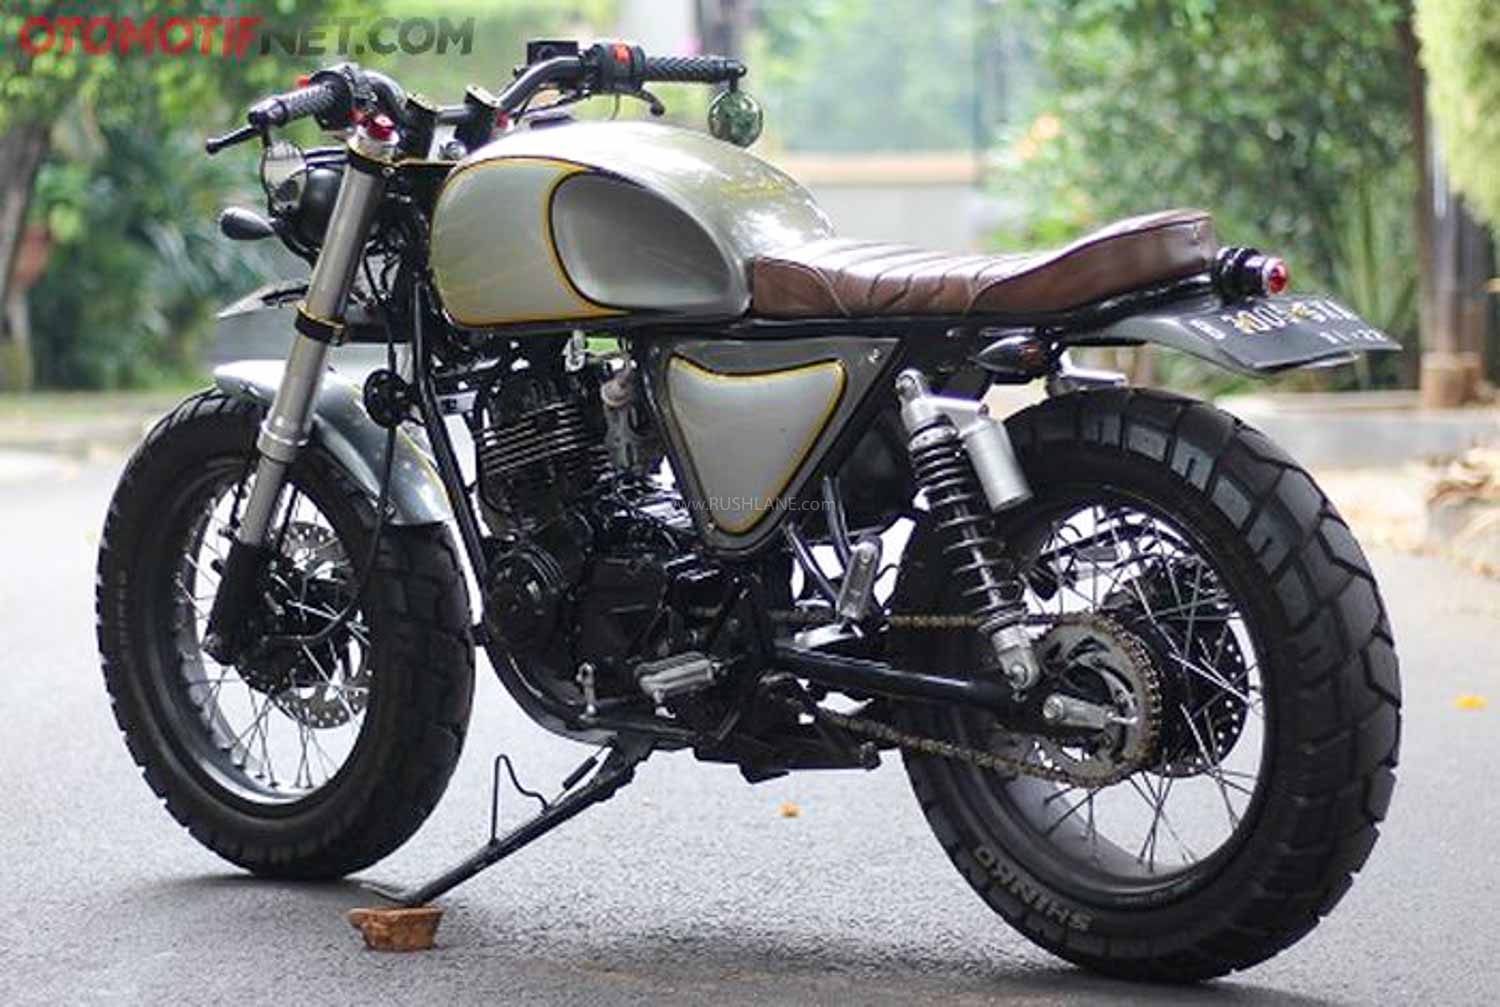 Tvs Apache Rtr 160 Modified Into A Scrambler For Approx Rs 15k